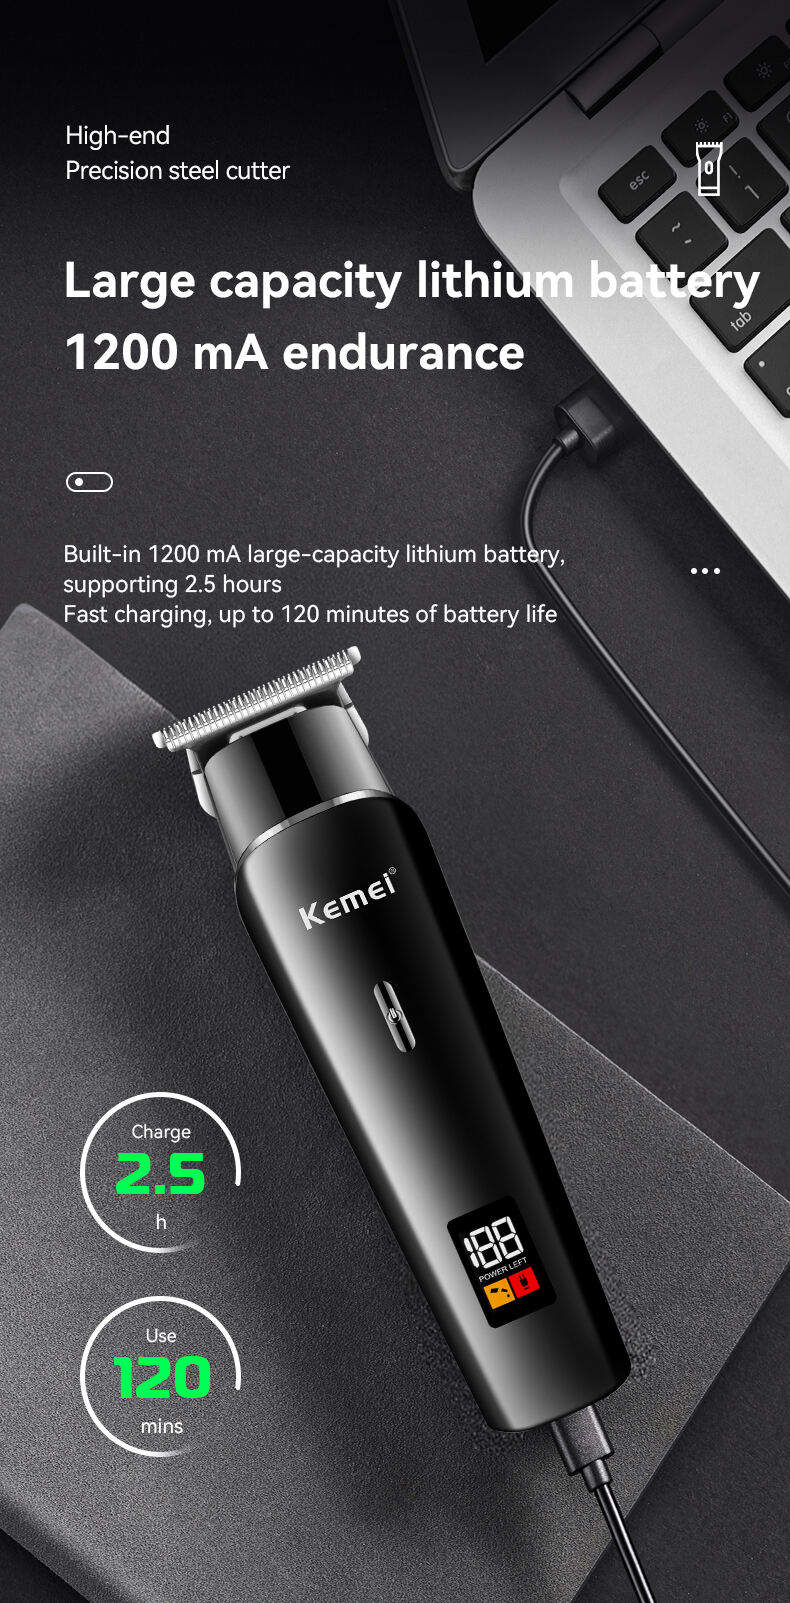 KE-1113 Beard Grooming Kit Mustache Nose Trimmer Body Shaver Cordless Electric Hair Clippers Razor for Men manufacture